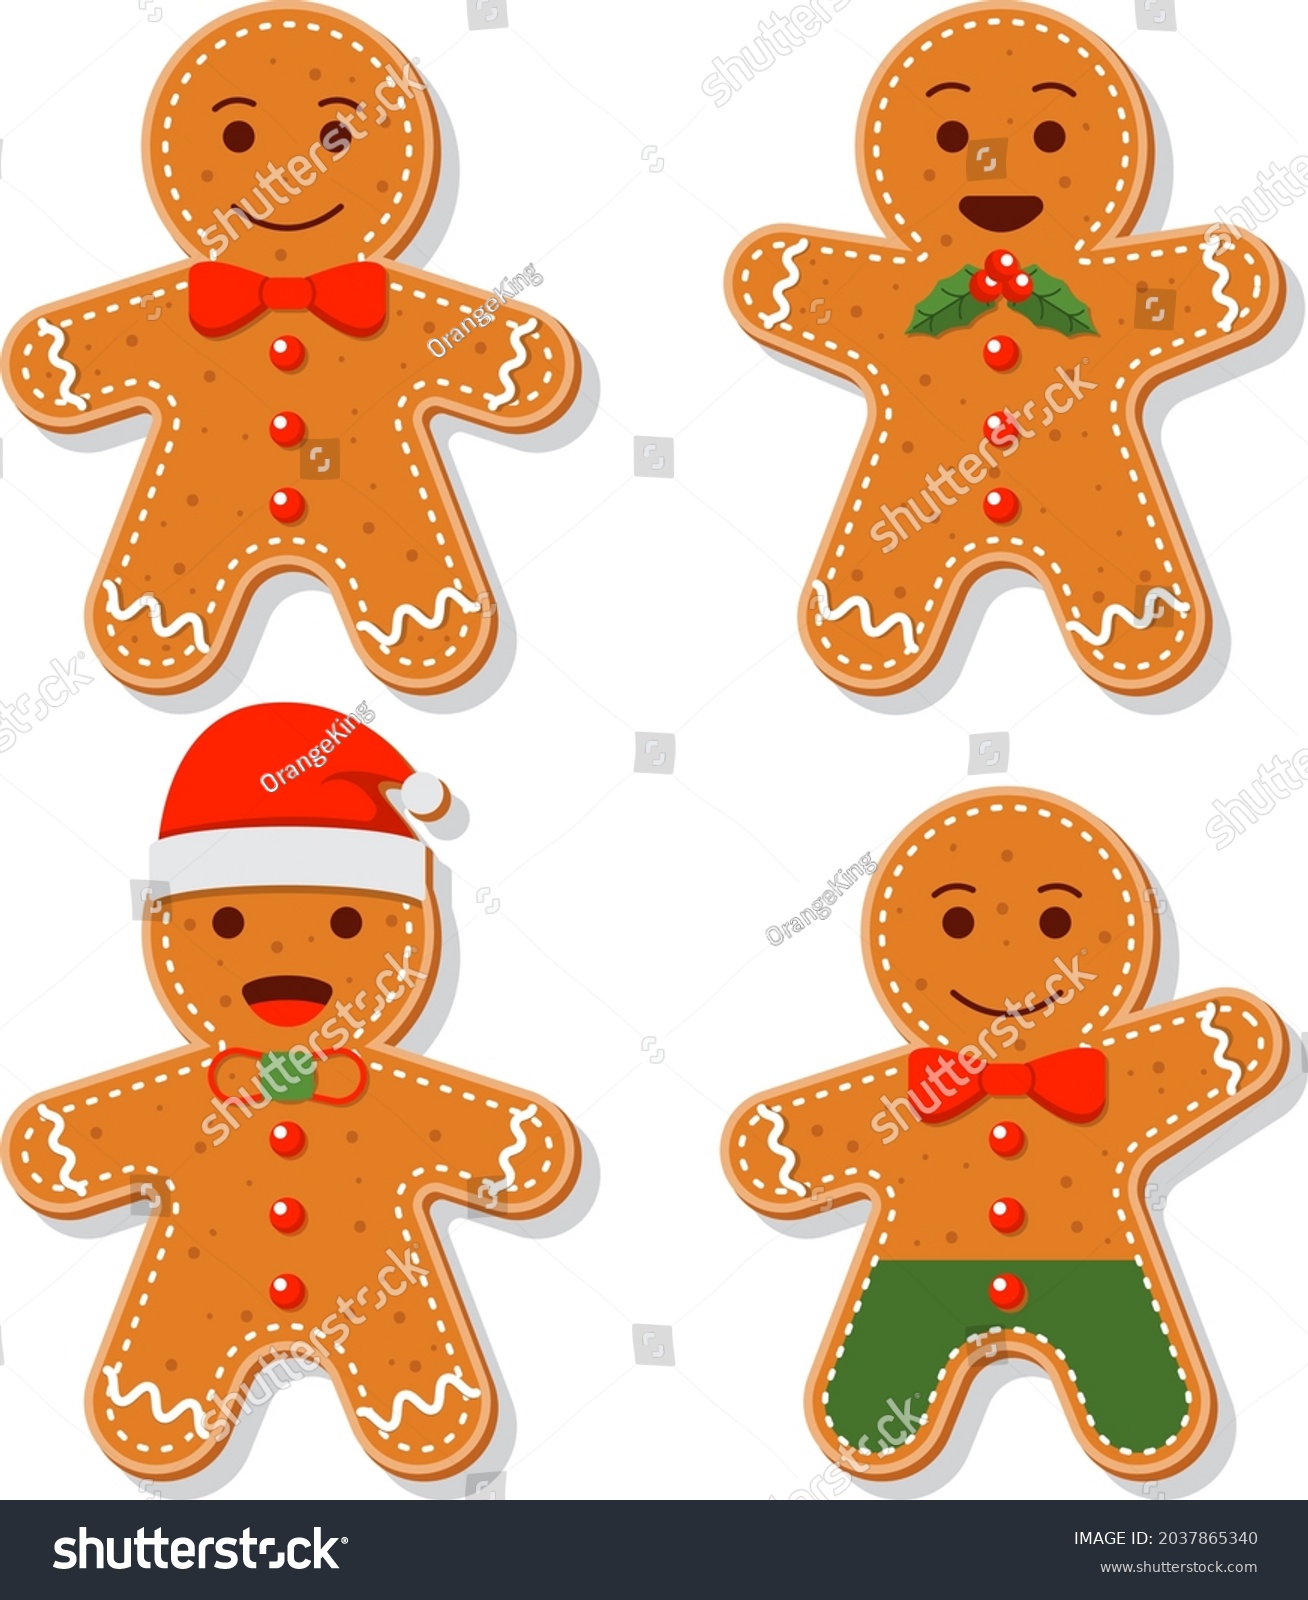 Gingerbread man collection. Christmas icon. Holiday winter symbols. Festive treats. New year cookies, sweets. Vector illustration. #2037865340